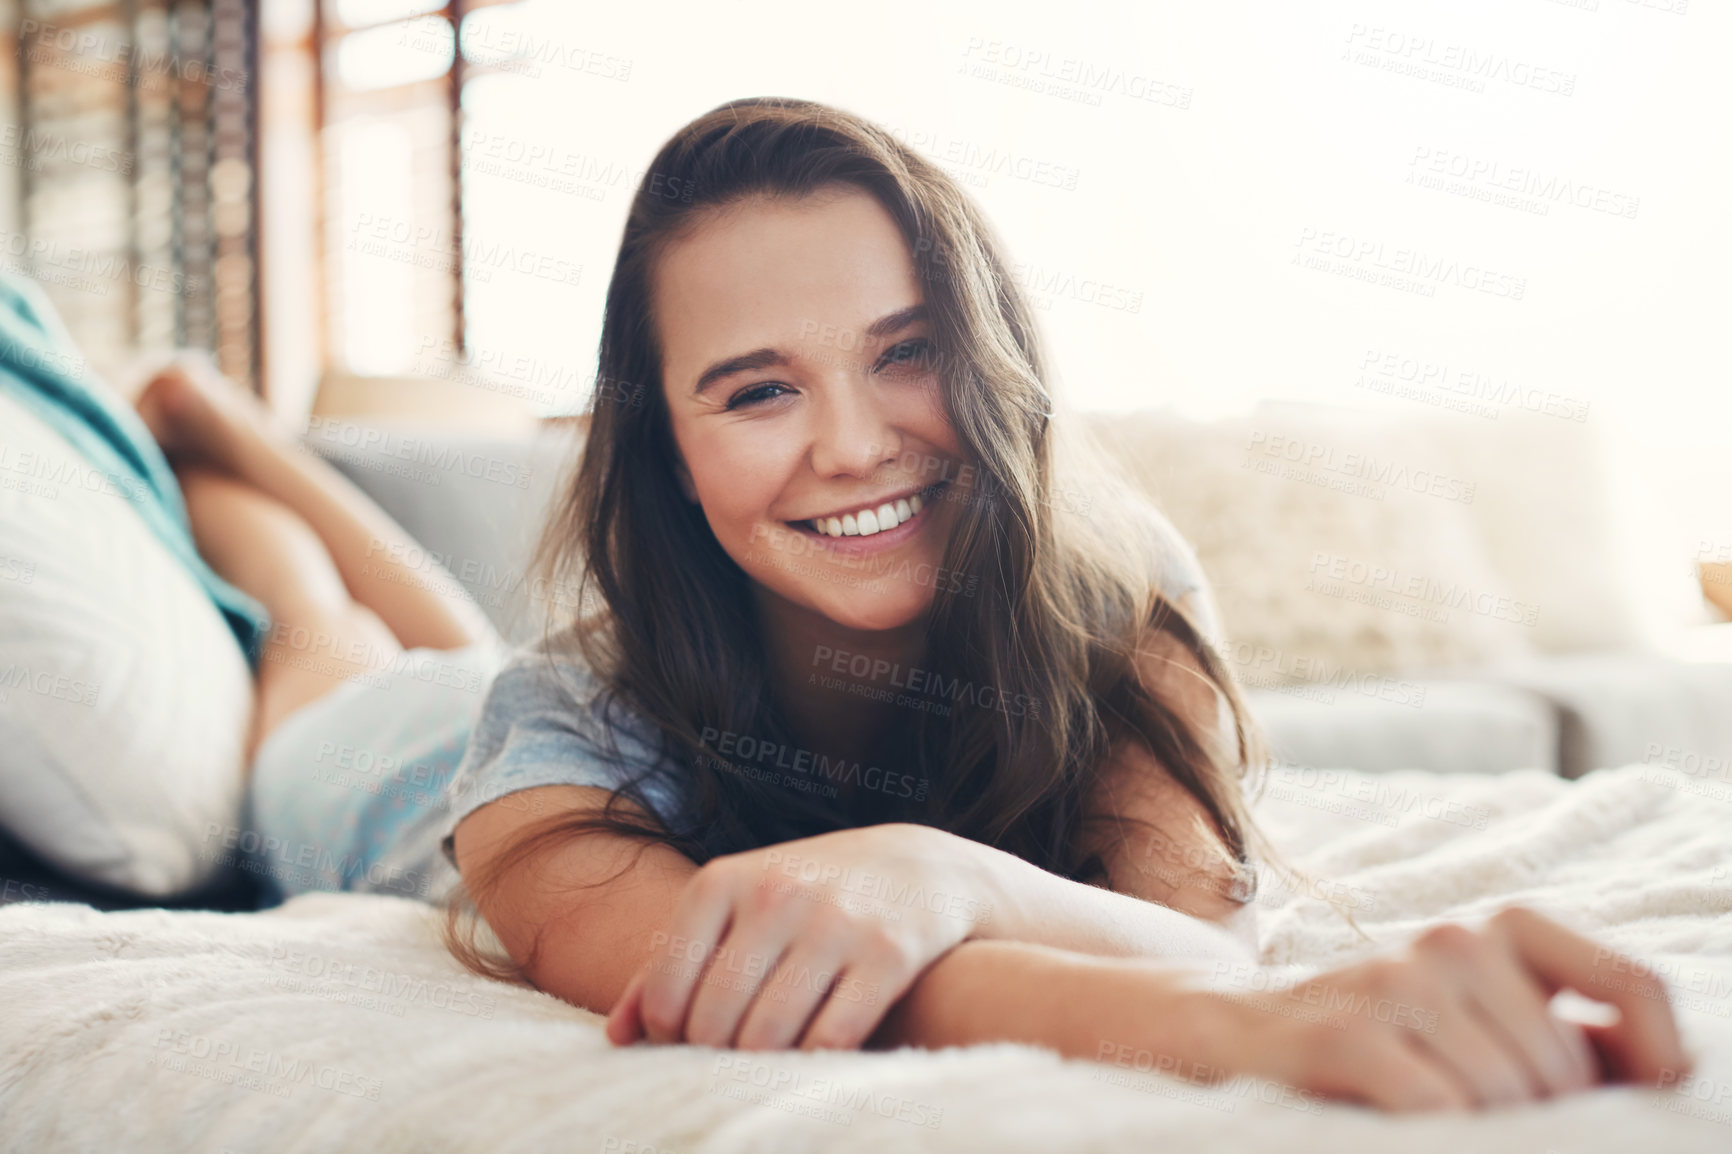 Buy stock photo Portrait of an attractive young woman spending a relaxing day on her bed at home